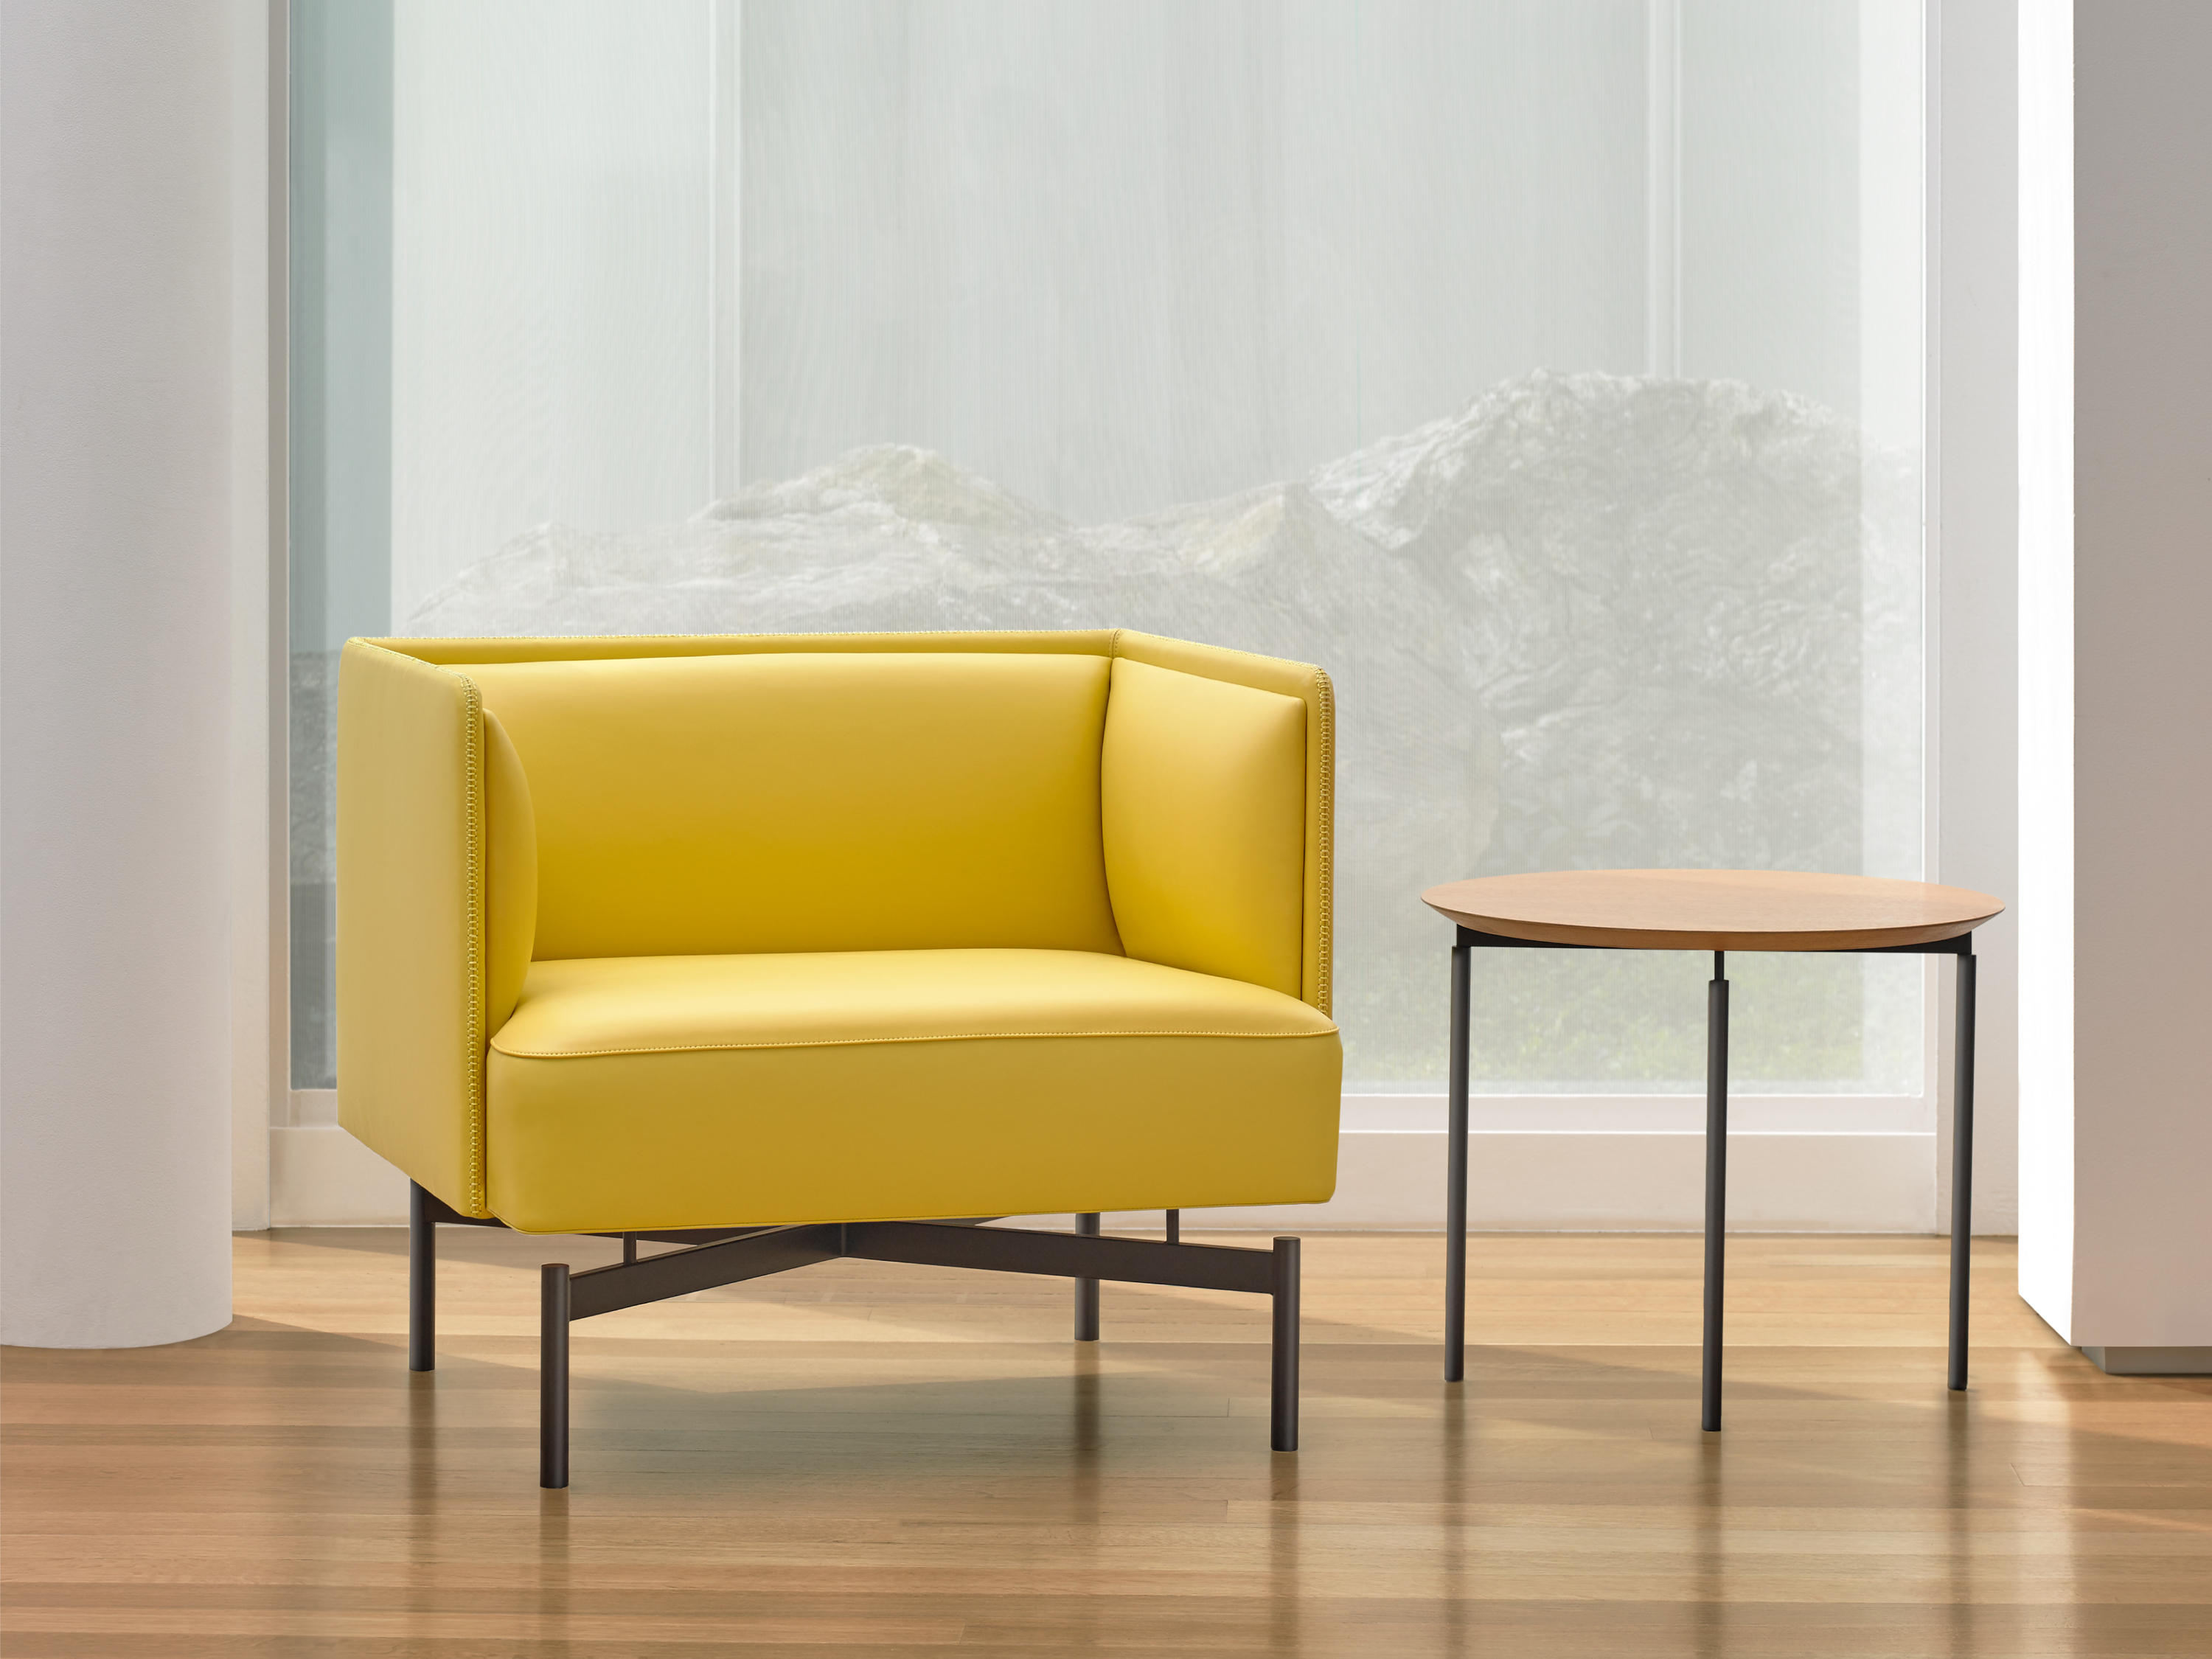 Finale Seating Collection by Charles Pollock for Bernhardt Design